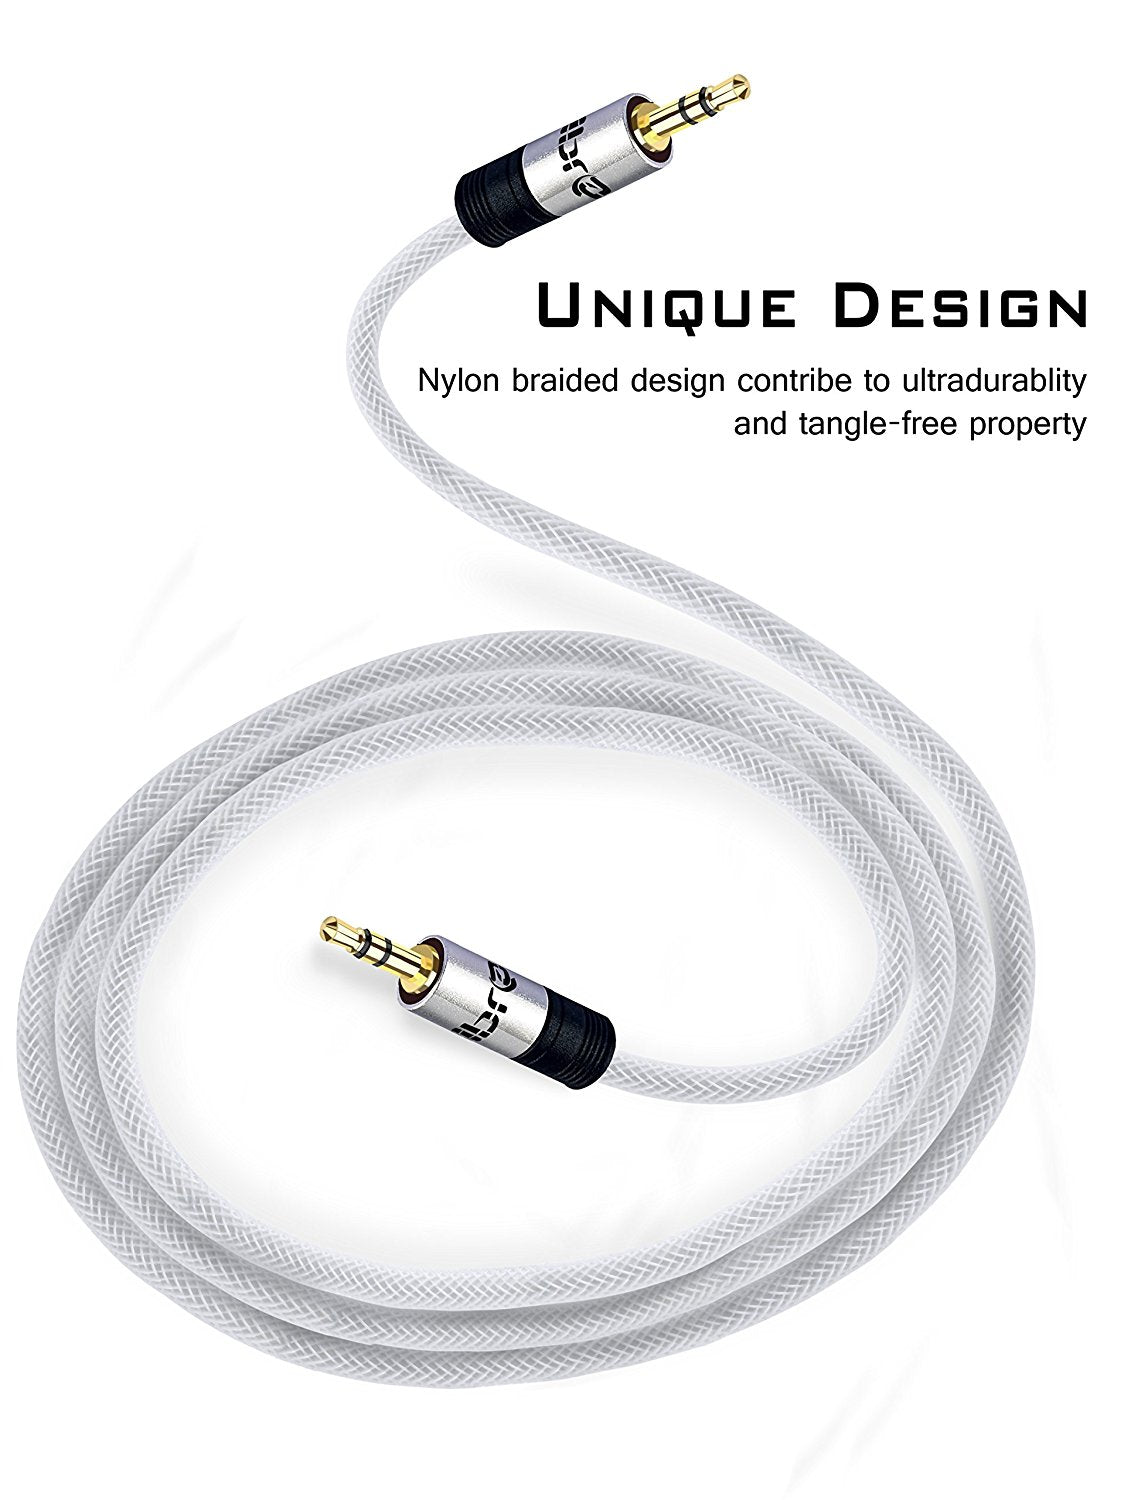 Aux Cable 10M 3.5mm Stereo Premium Auxiliary Audio Cable - for Beats Headphones Apple iPod iPhone iPad Samsung LG Smartphone MP3 Player Home / Car etc - IBRA Silver